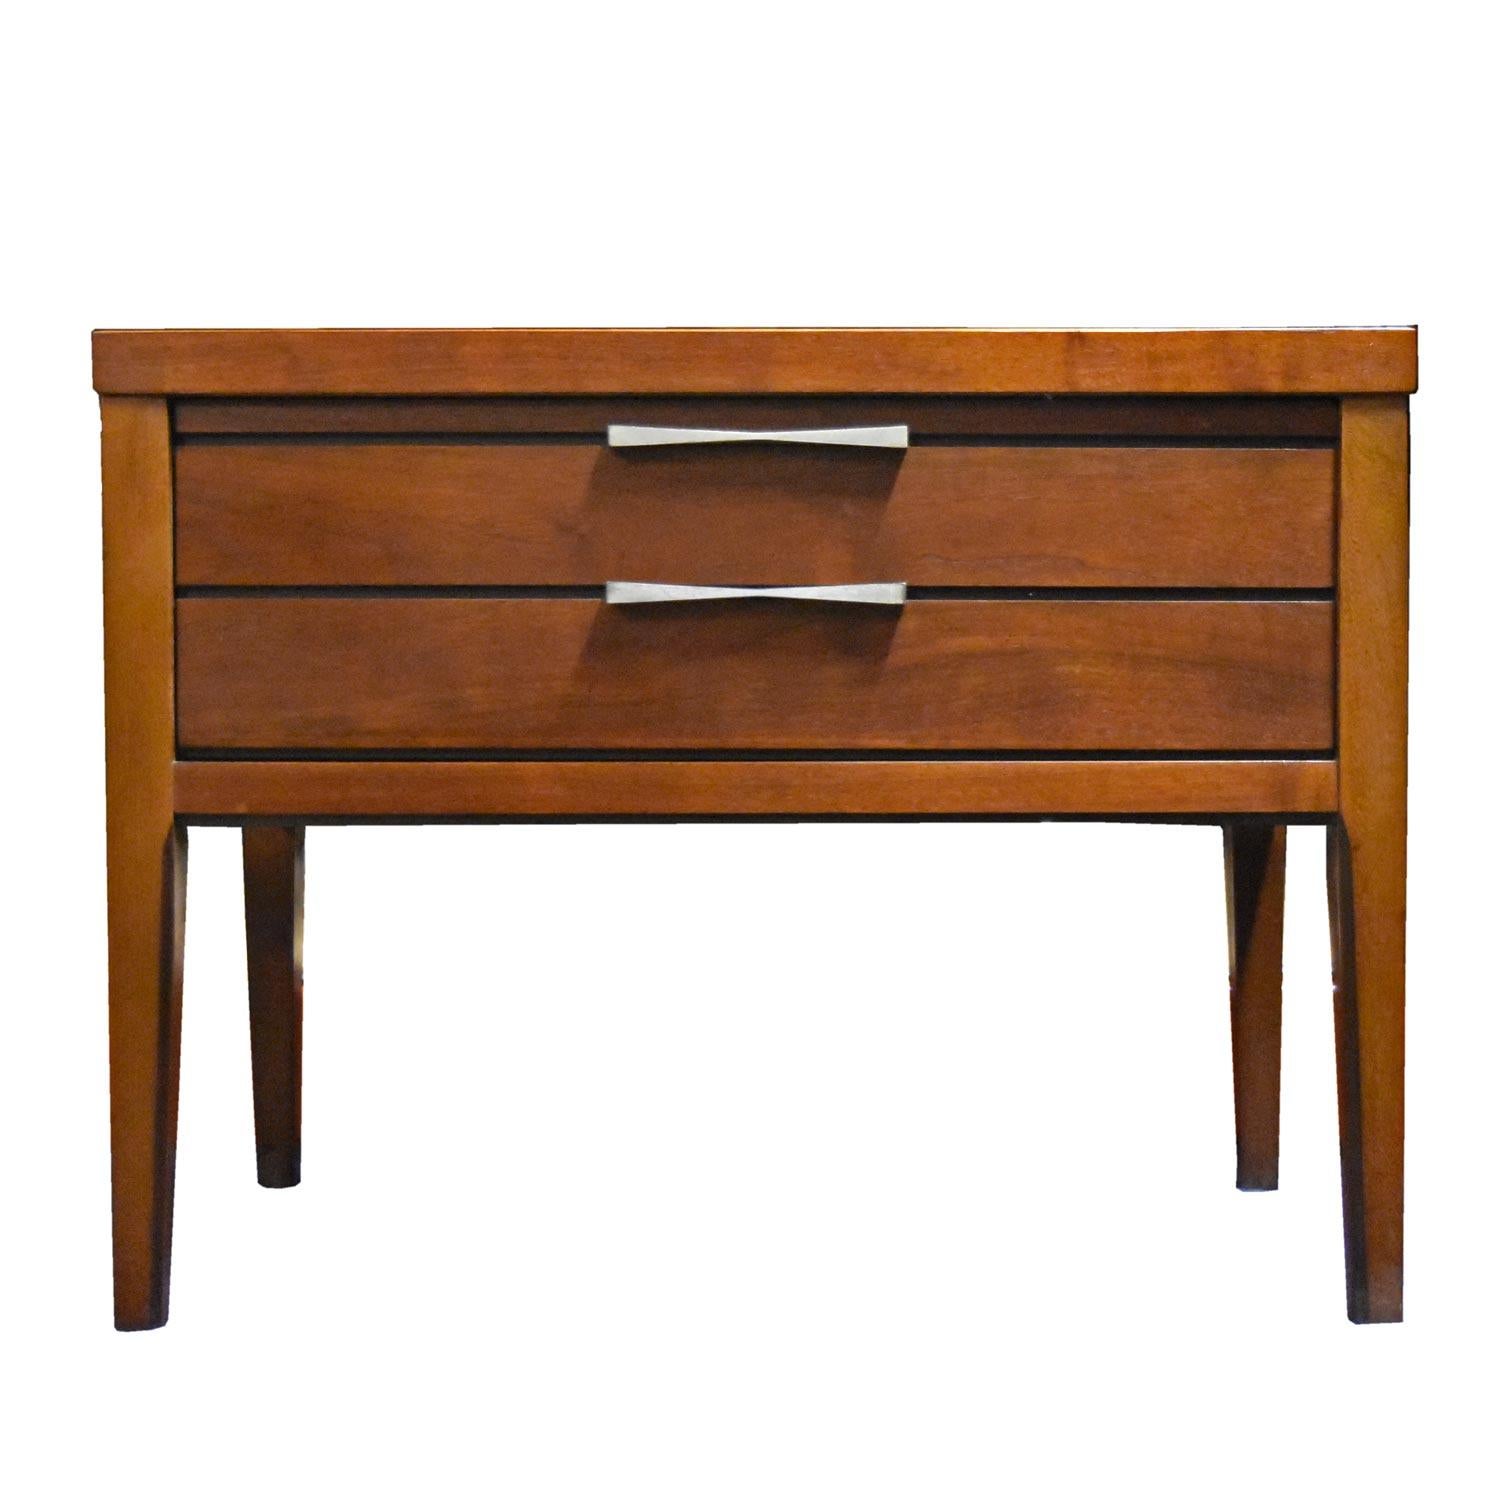 Fabulous, hard to find, Mid-Century Modern Lane tuxedo nightstand / end table. One of our absolute favorite collections of the period. It is easy to see why Lane dubbed this the “Tuxedo” collection. Neatly tailored with smart aluminum metal bow tie